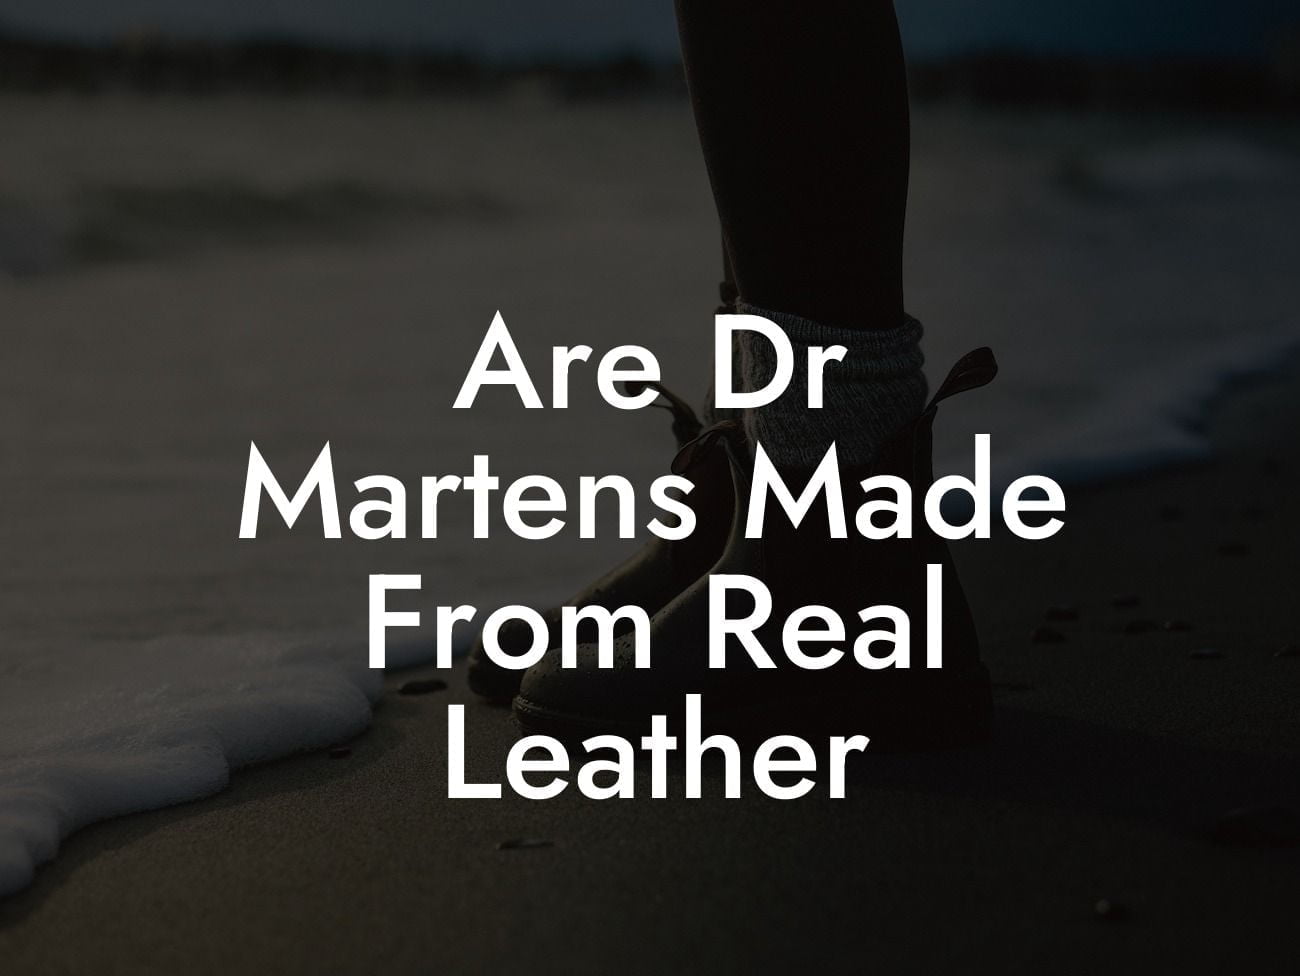 Are Dr Martens Made From Real Leather